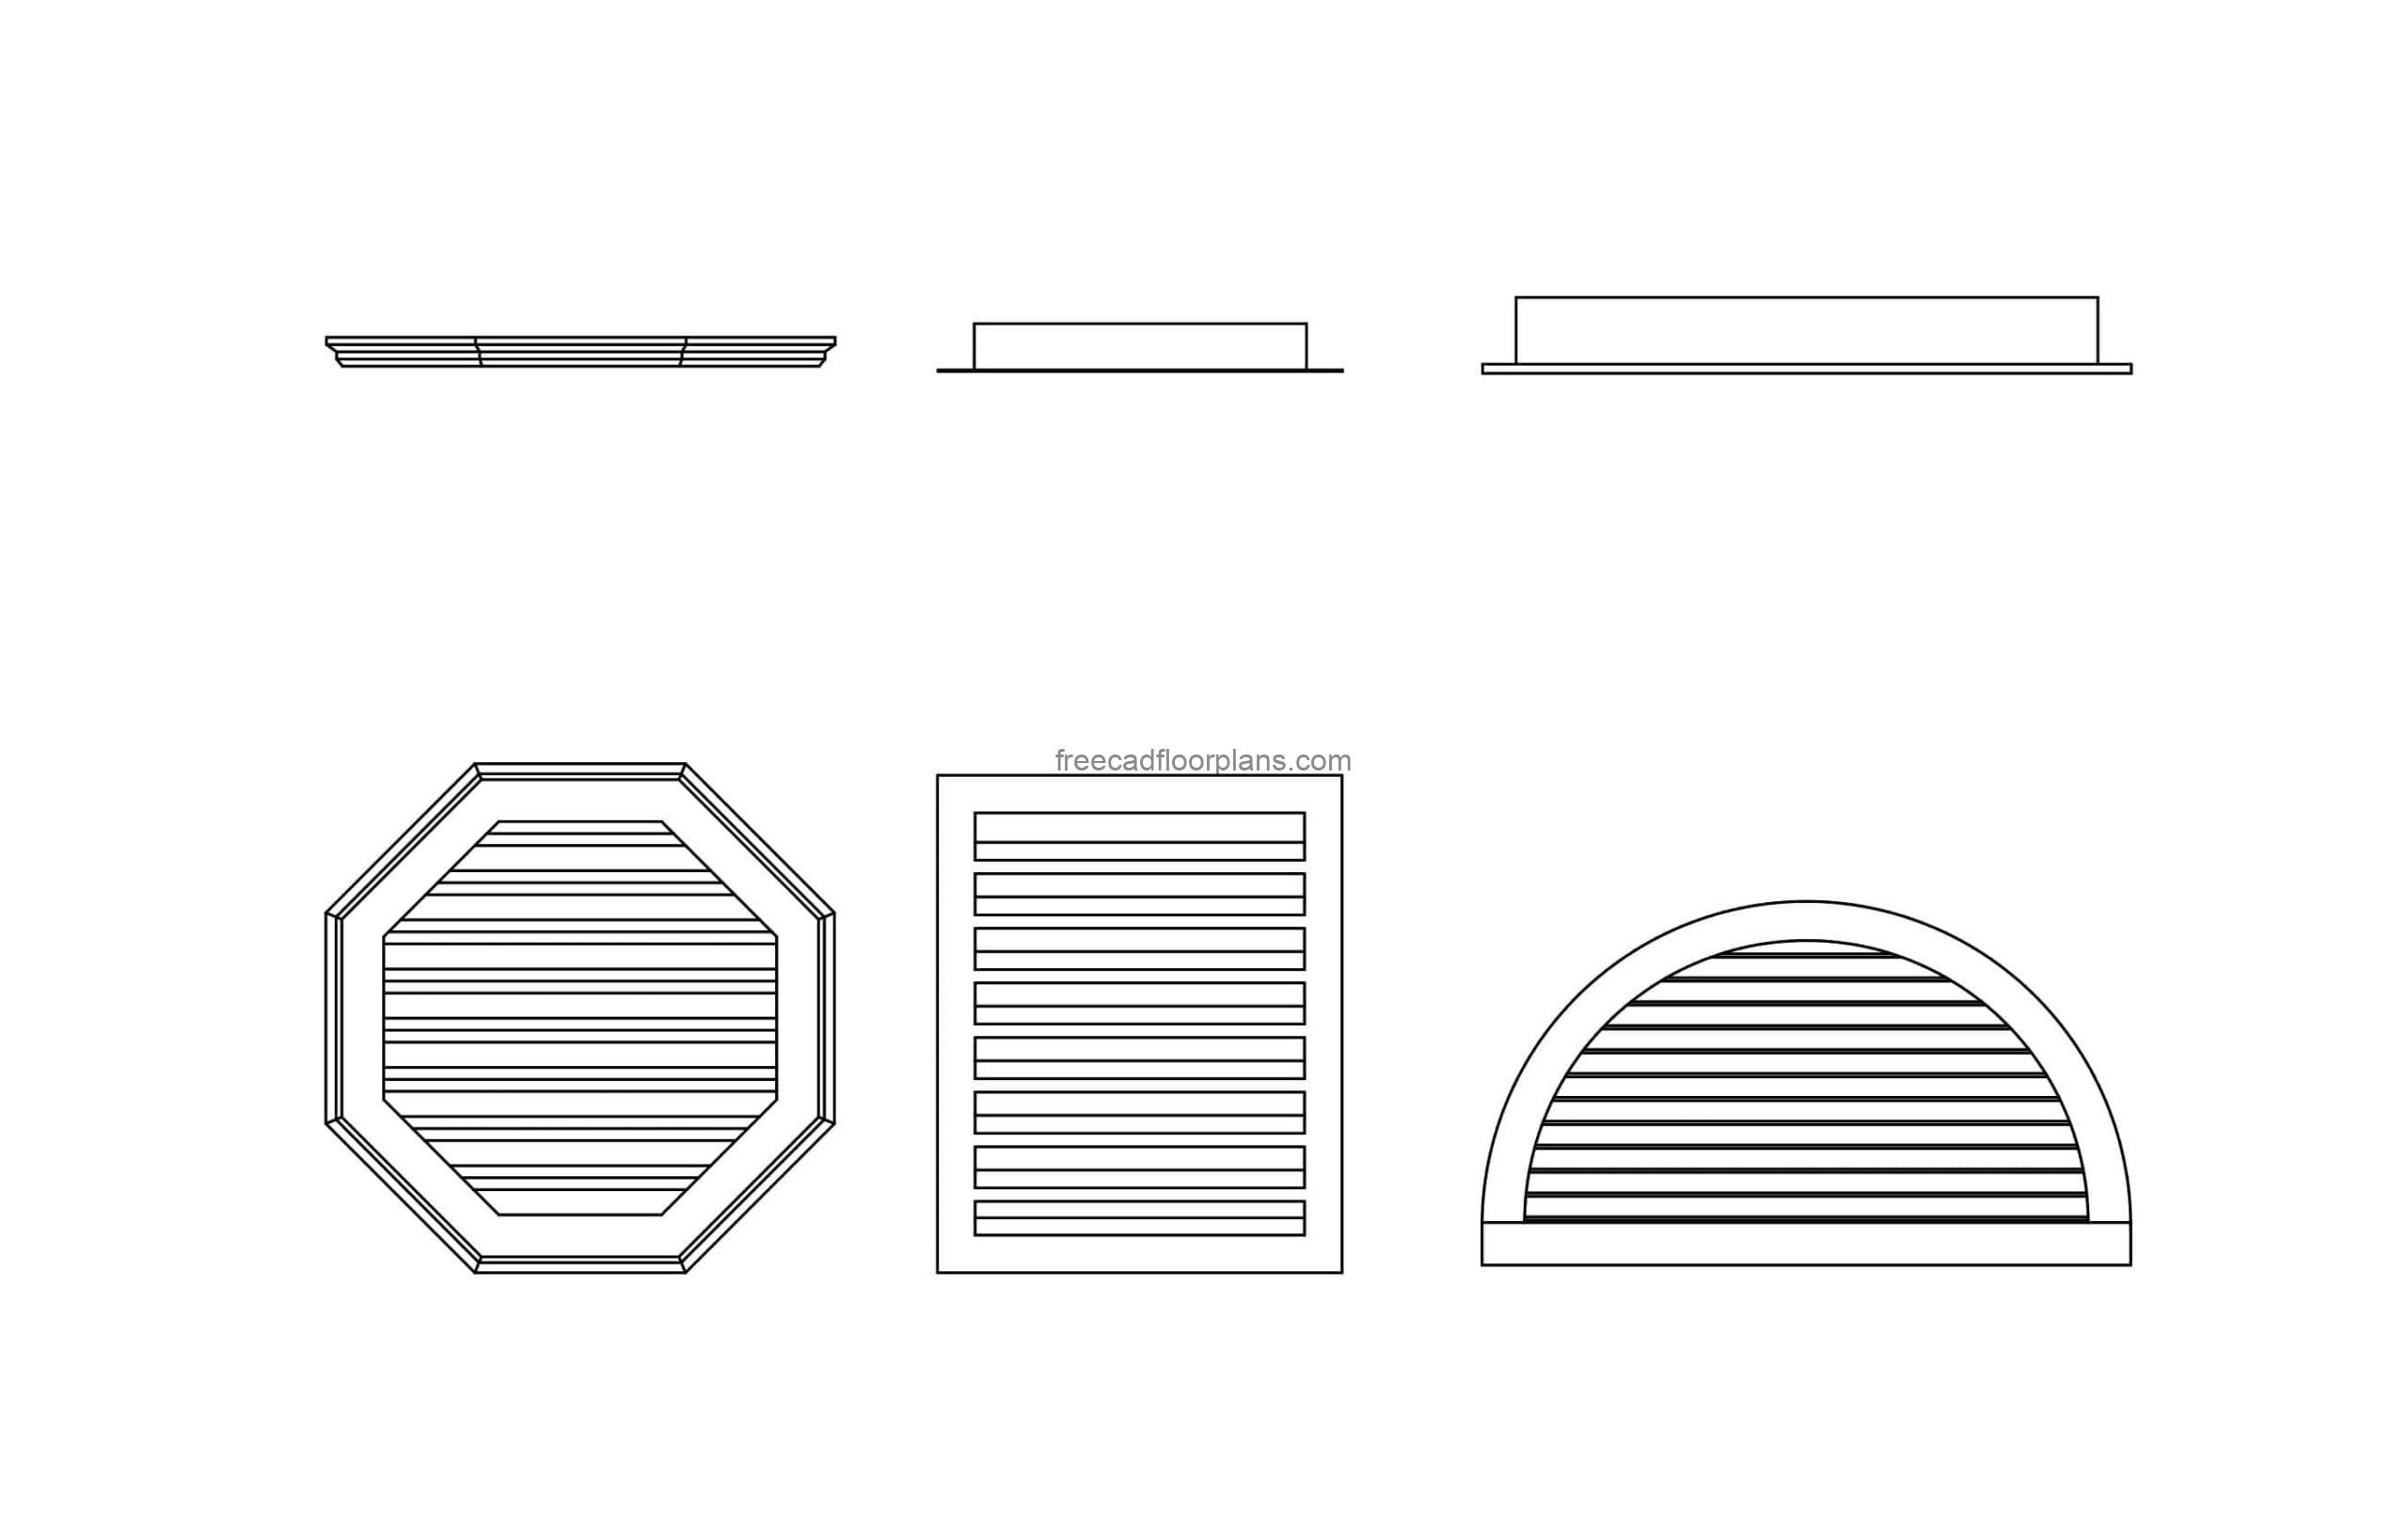 gable vent autocad block, 2d views, plan and elevations dwg file for free download